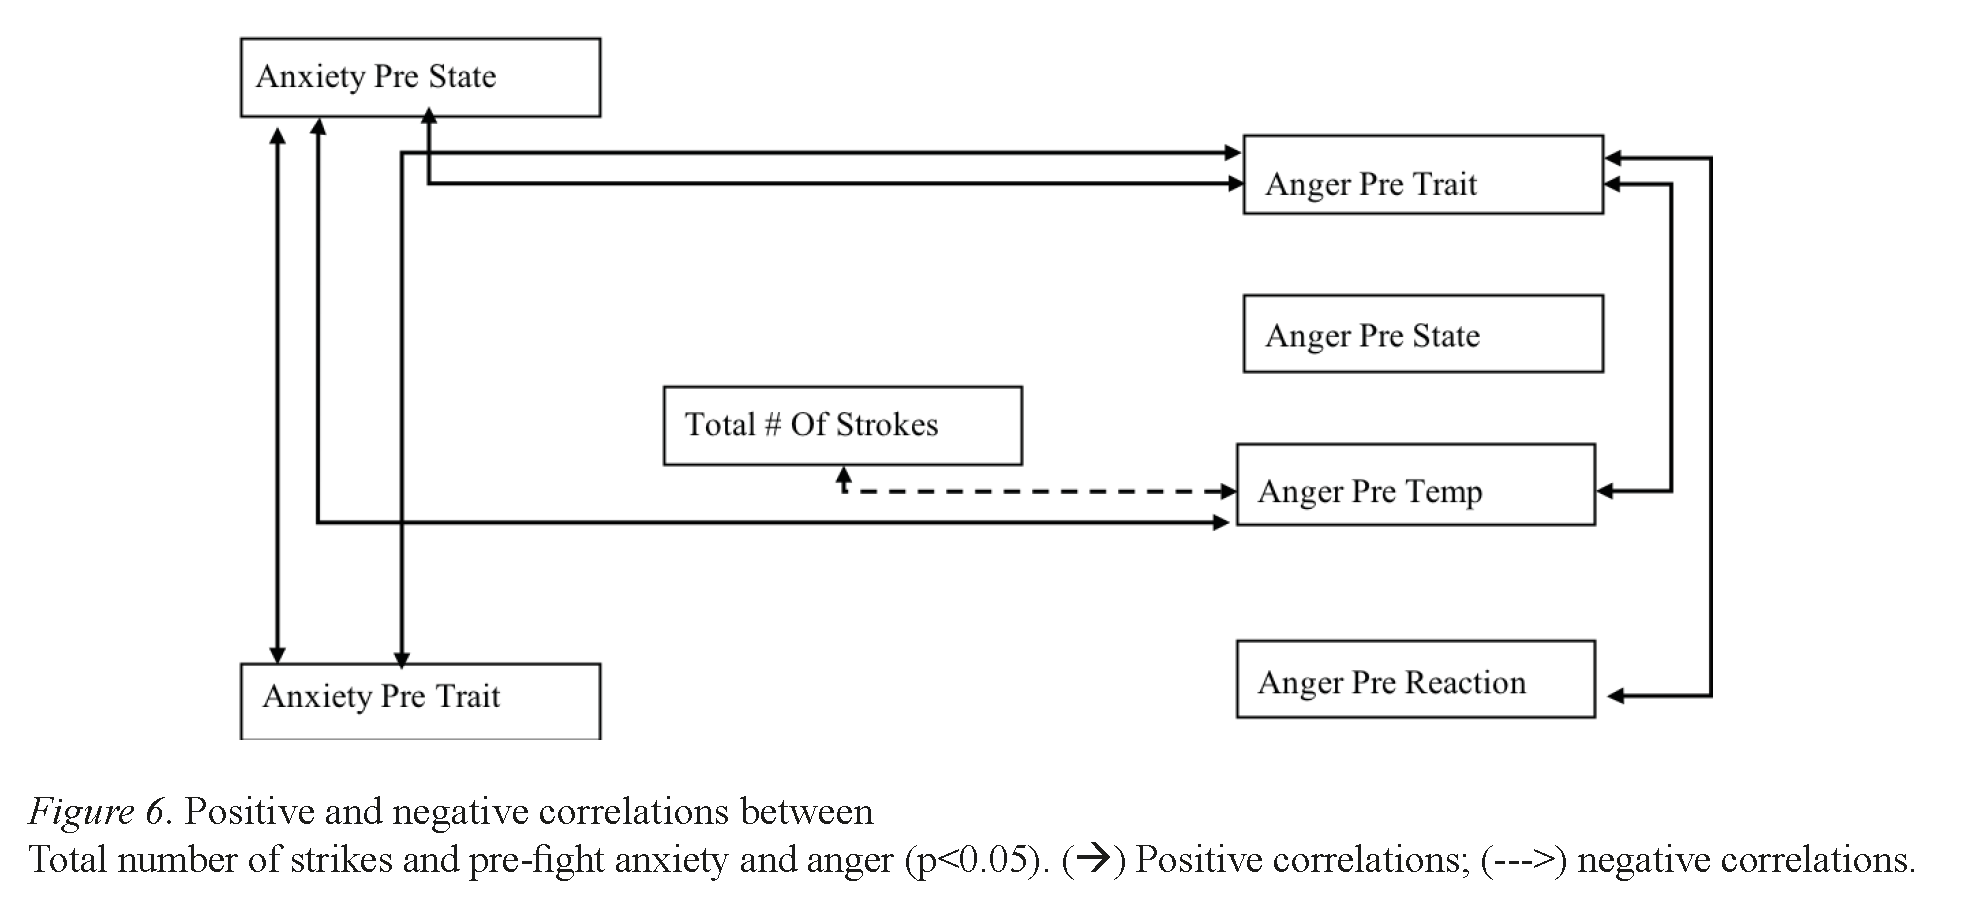 Positive and negative correlations between Total number of strikes and pre-fight anxiety and anger (p<0.05).